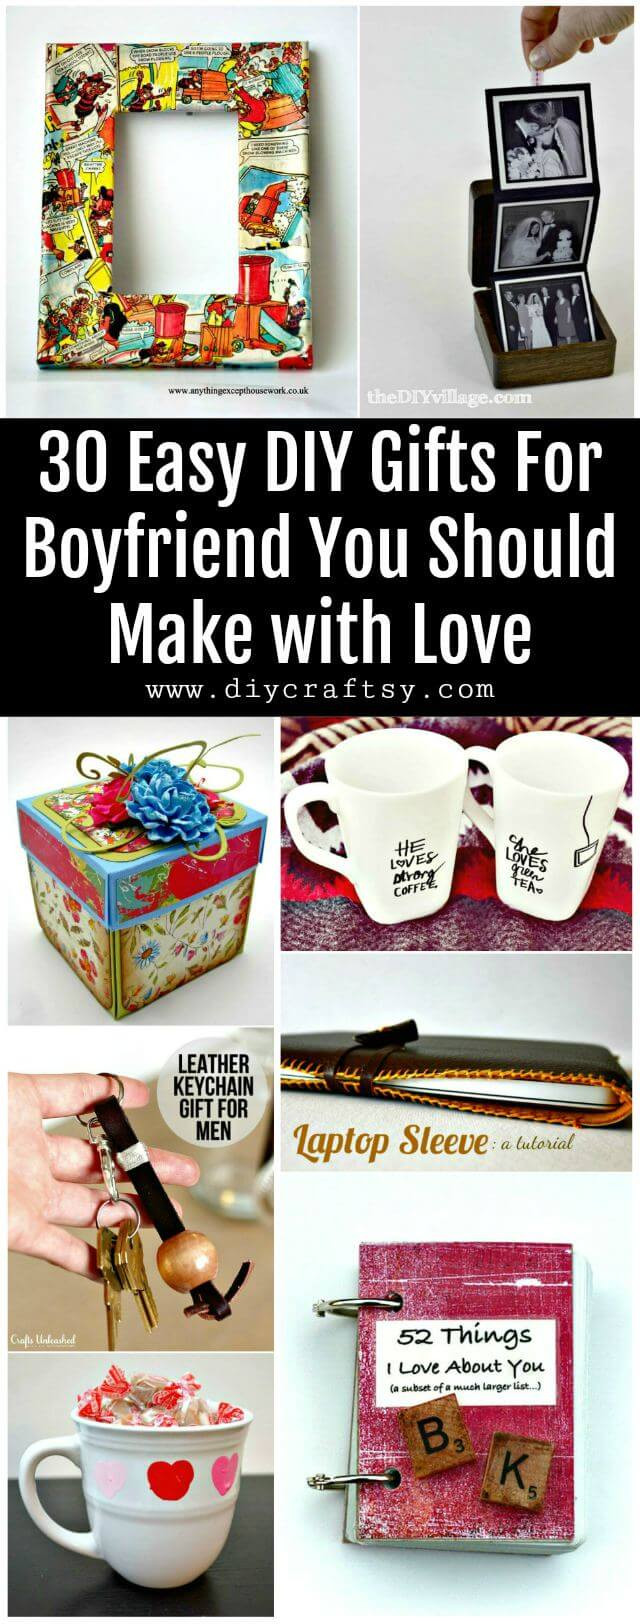 Diy Gift Ideas For Boyfriends
 30 Easy DIY Gifts For Boyfriend You Should Make with Love